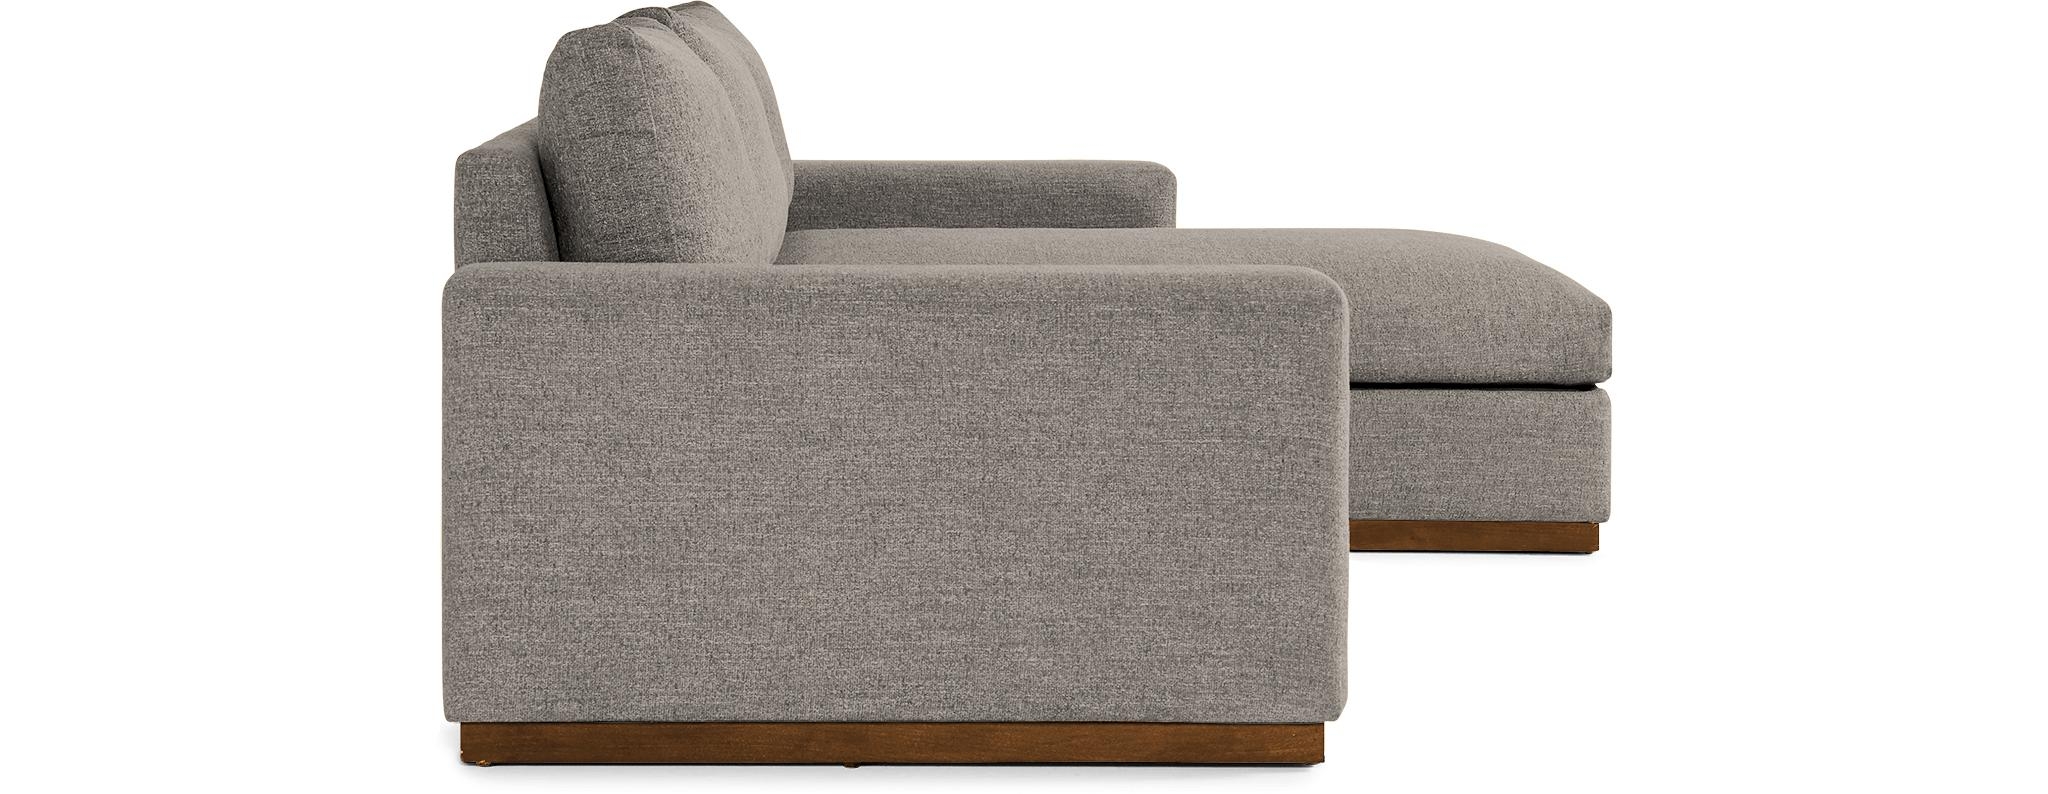 Beige/White Holt Mid Century Modern Sectional with Storage - Prime Stone - Mocha - Right - Image 2